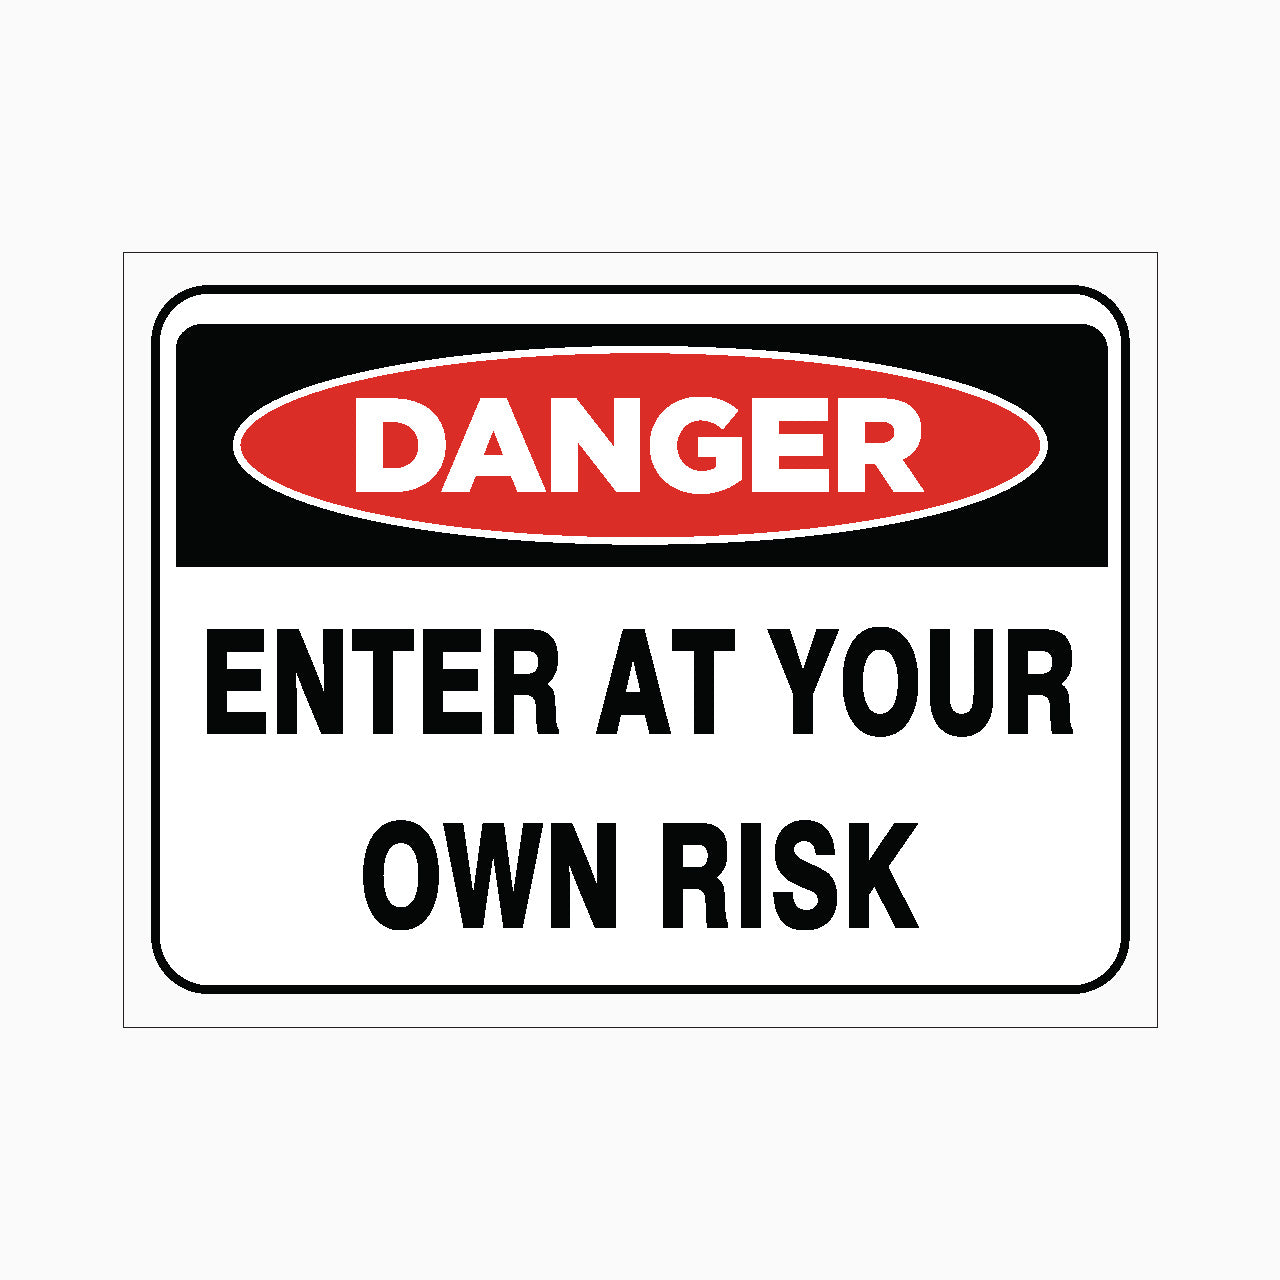 ENTER AT YOUR OWN RISK SIGN - GET SIGNS